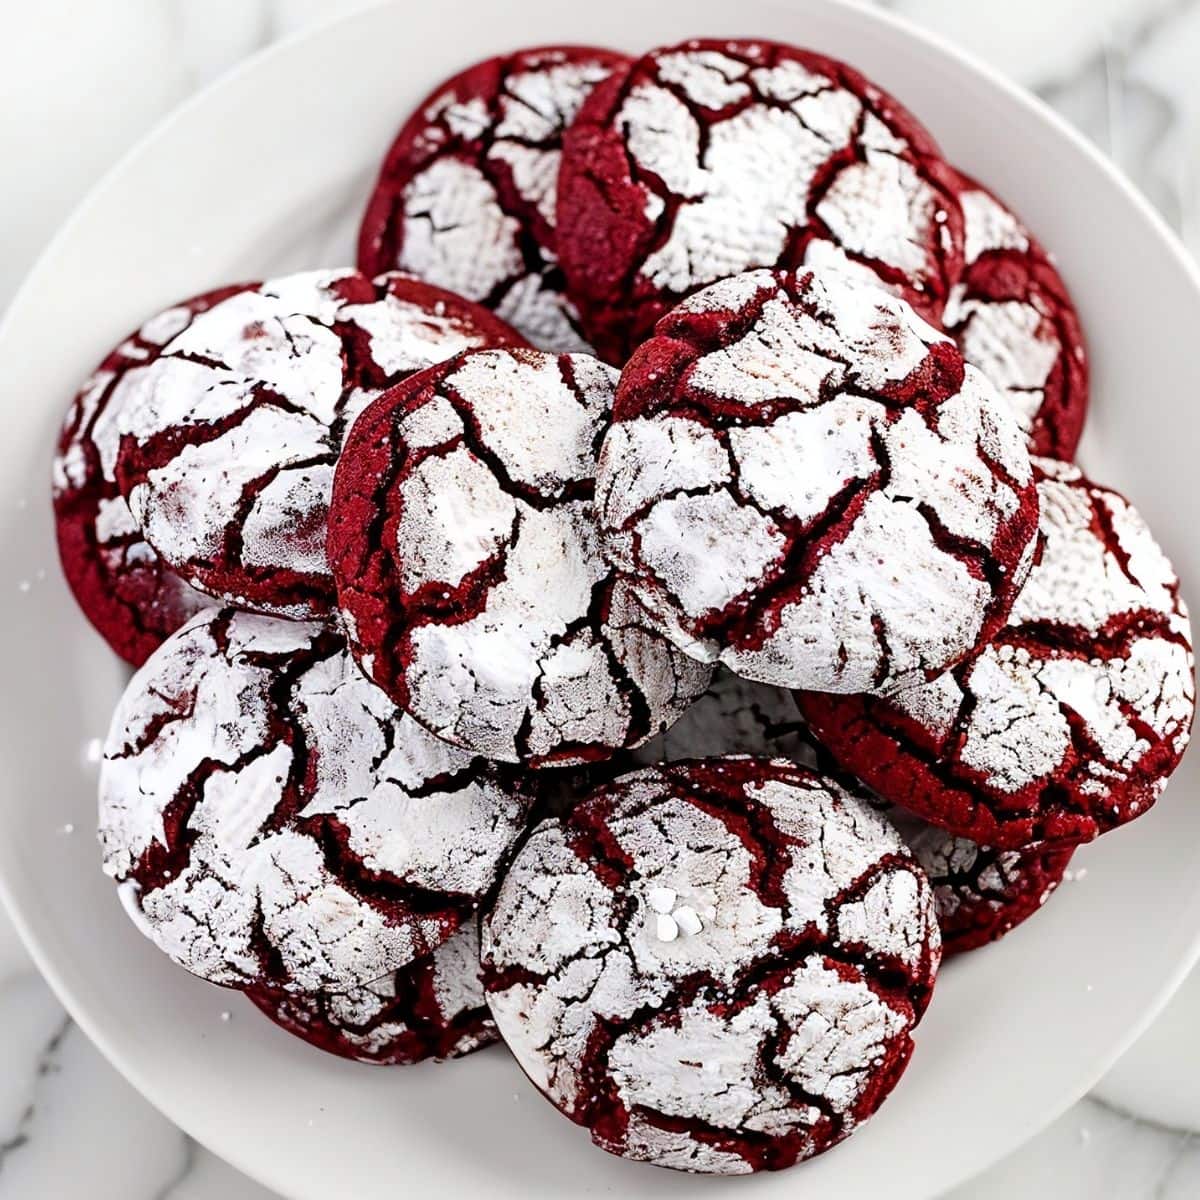 Top View of Pile of Red Velvet Crinkle Cookies with Powdered Sugar on a White Plate